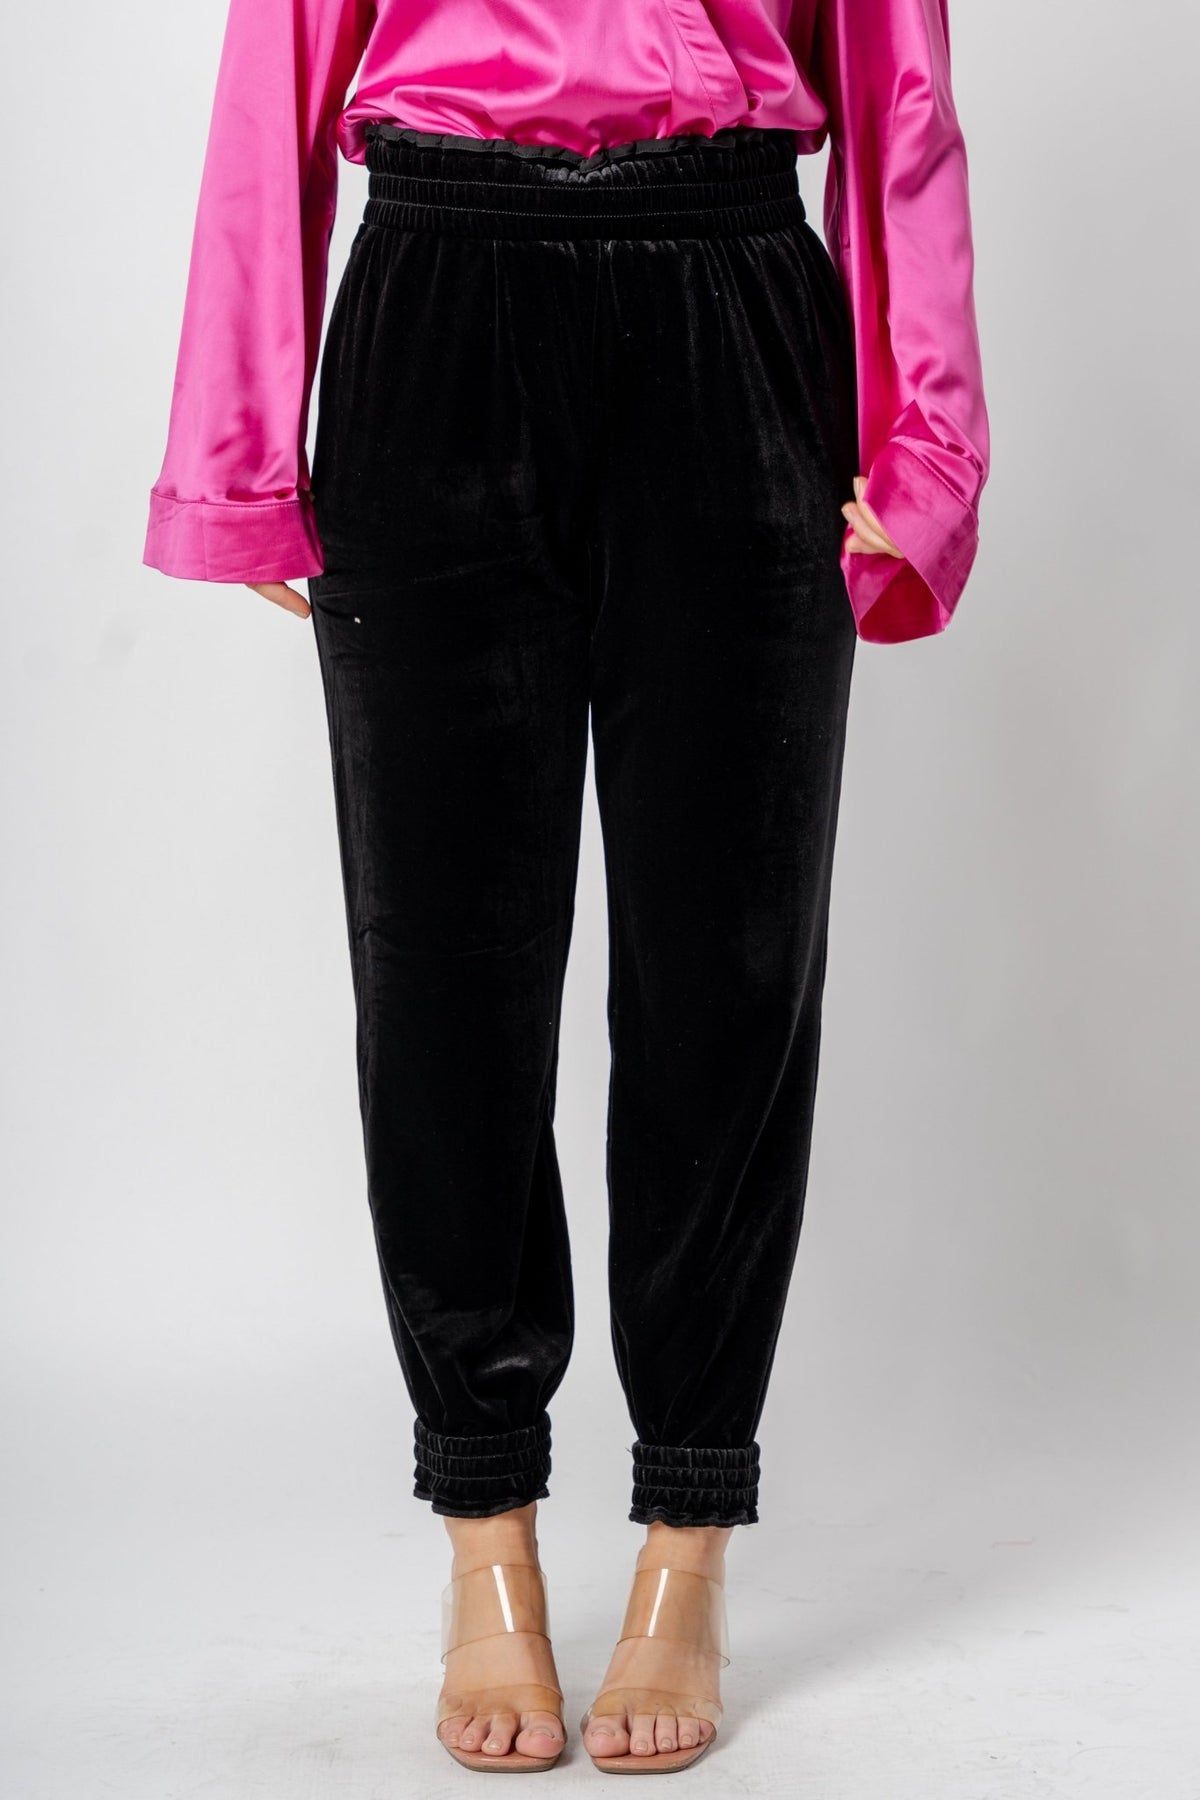 Velvet jogger pants black - Trendy New Year's Eve Outfits at Lush Fashion Lounge Boutique in Oklahoma City